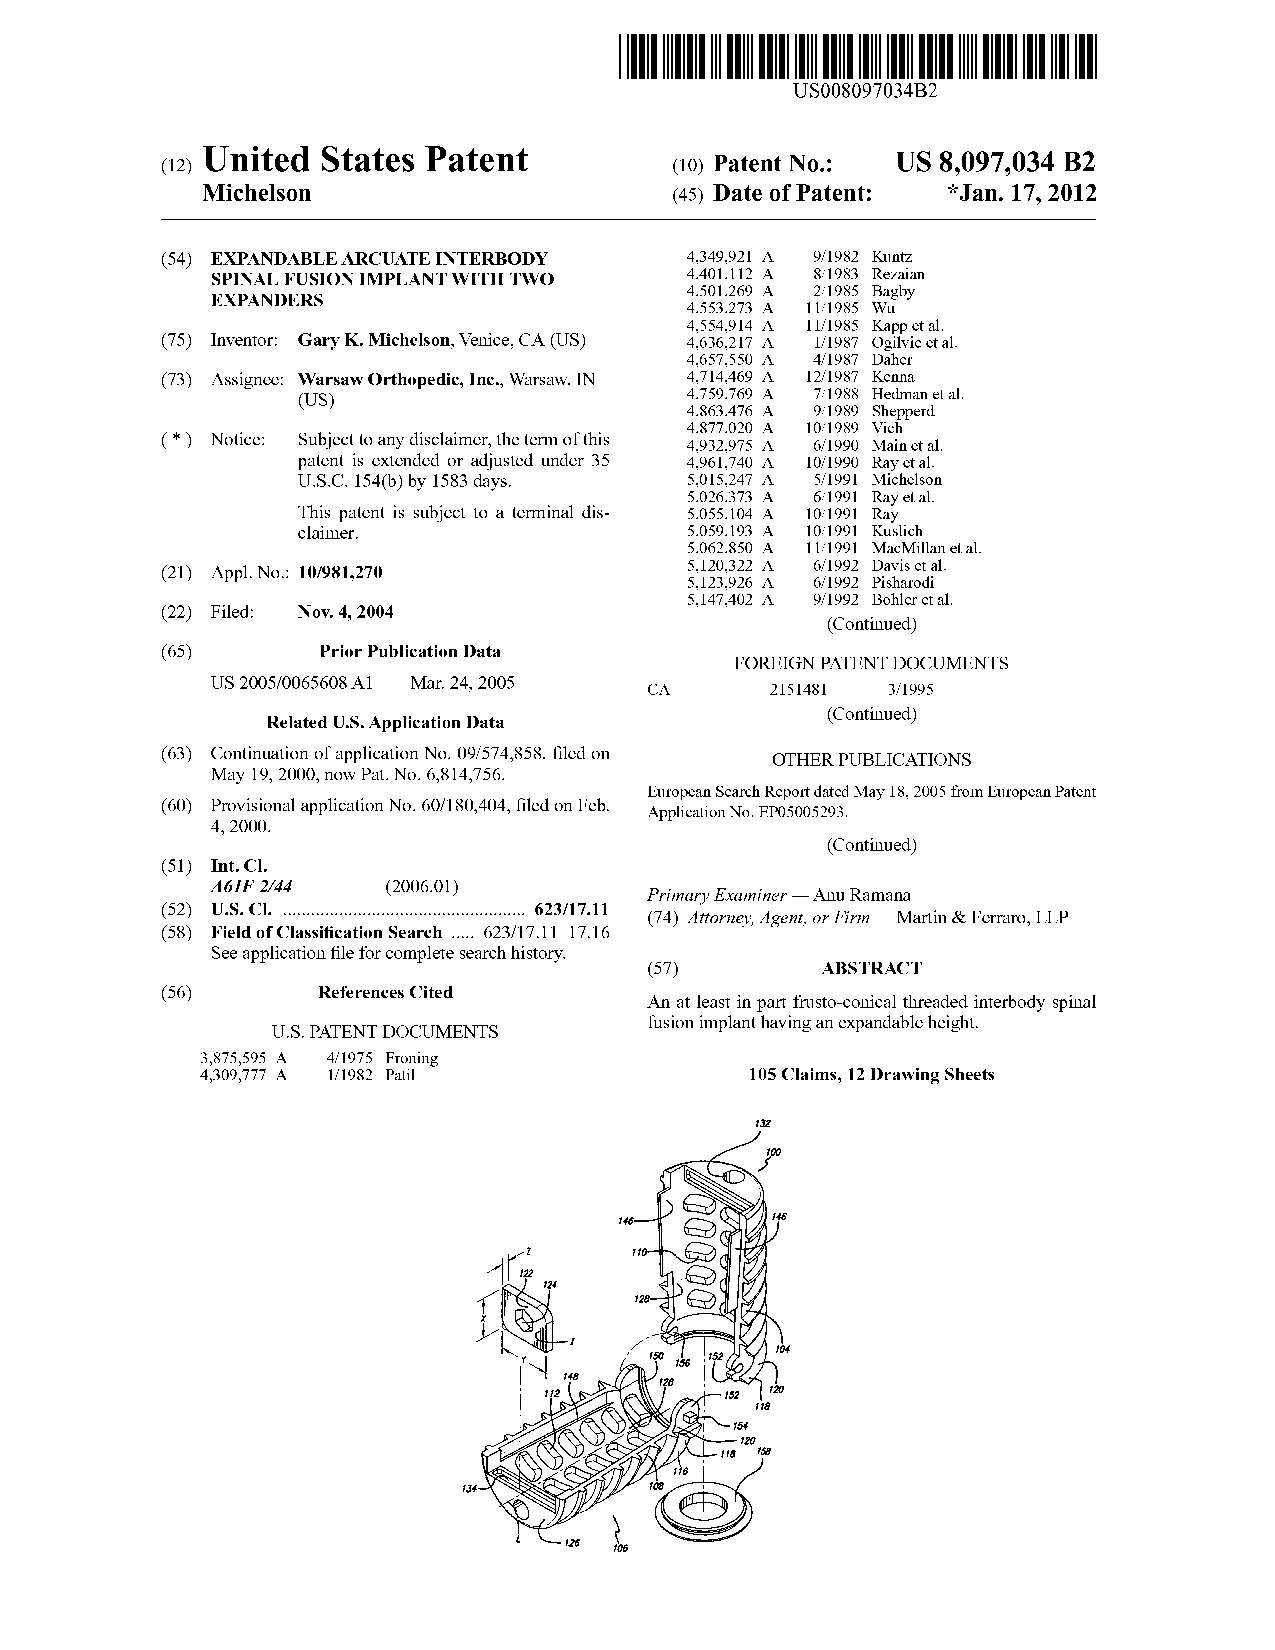 Expandable arcuate interbody spinal fusion implant with two expanders - Patent 8,097,034